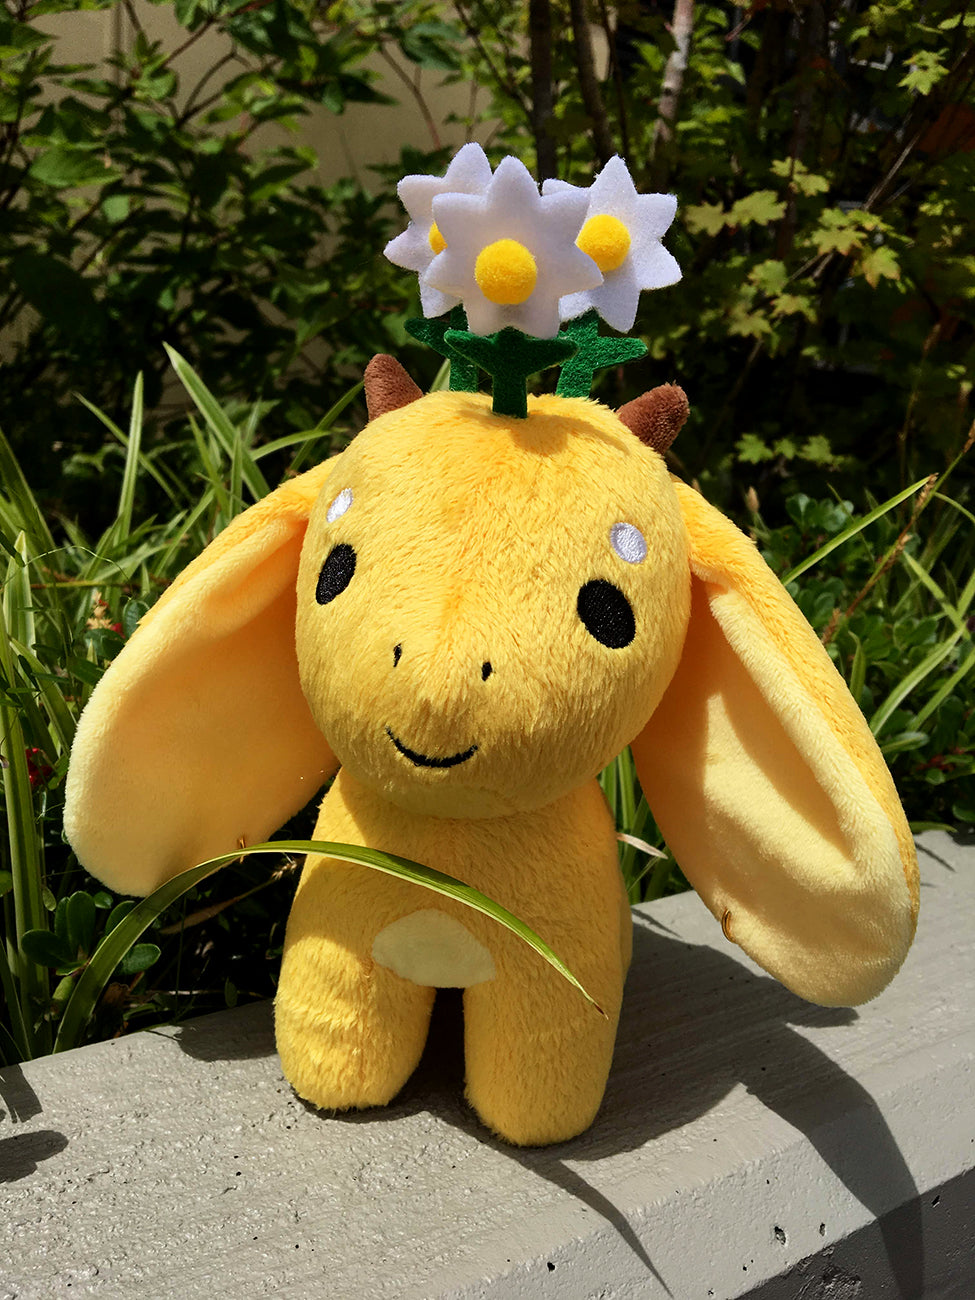 Chamomile plush stands outside in the sun in front of greenery.